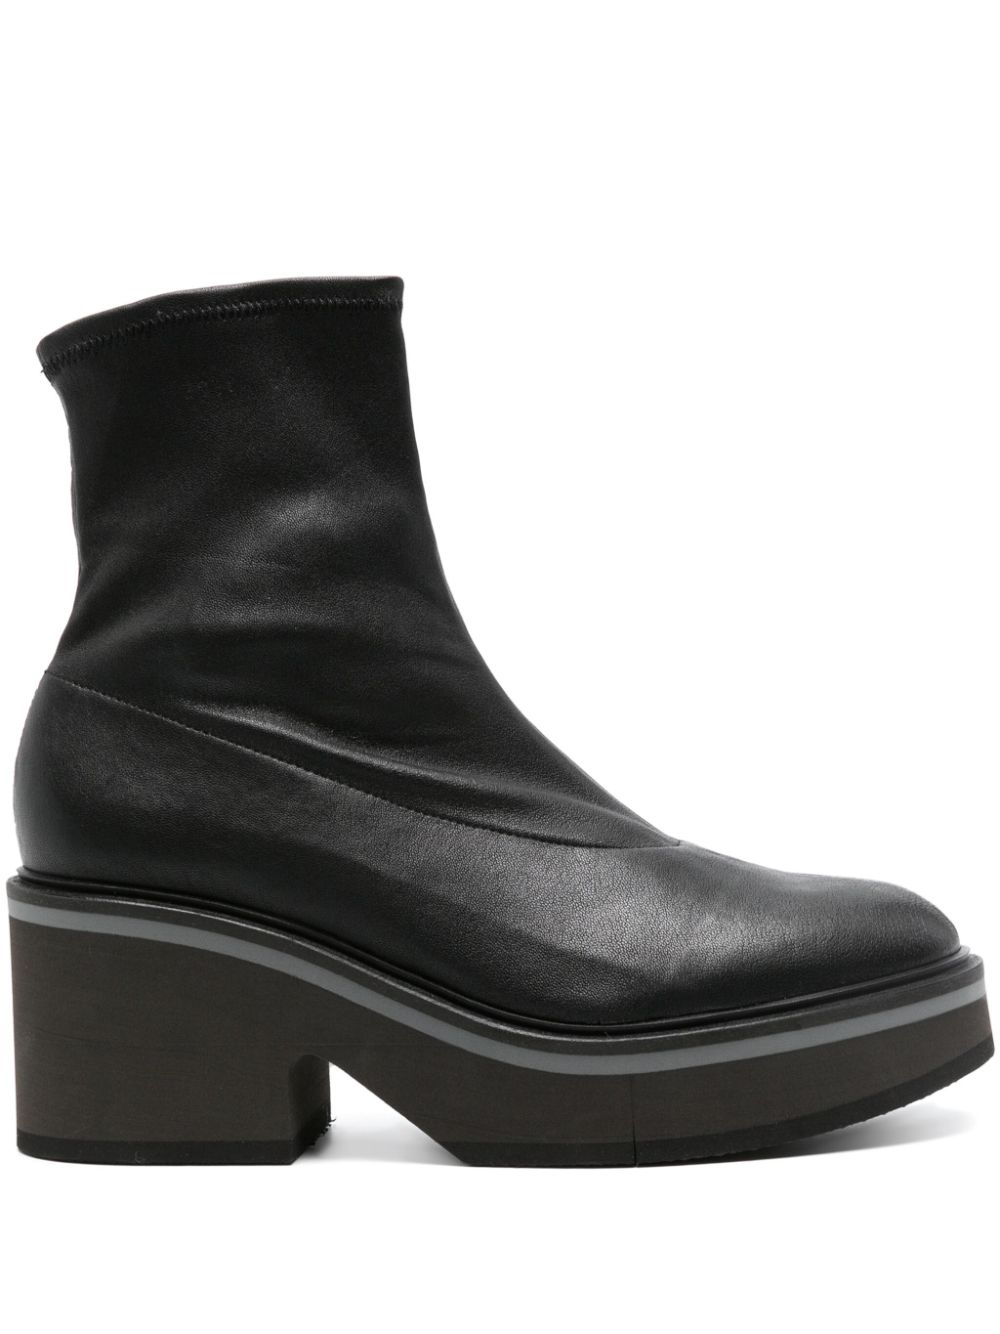 Clergerie Albana 75mm Leather Ankle Boots - Farfetch